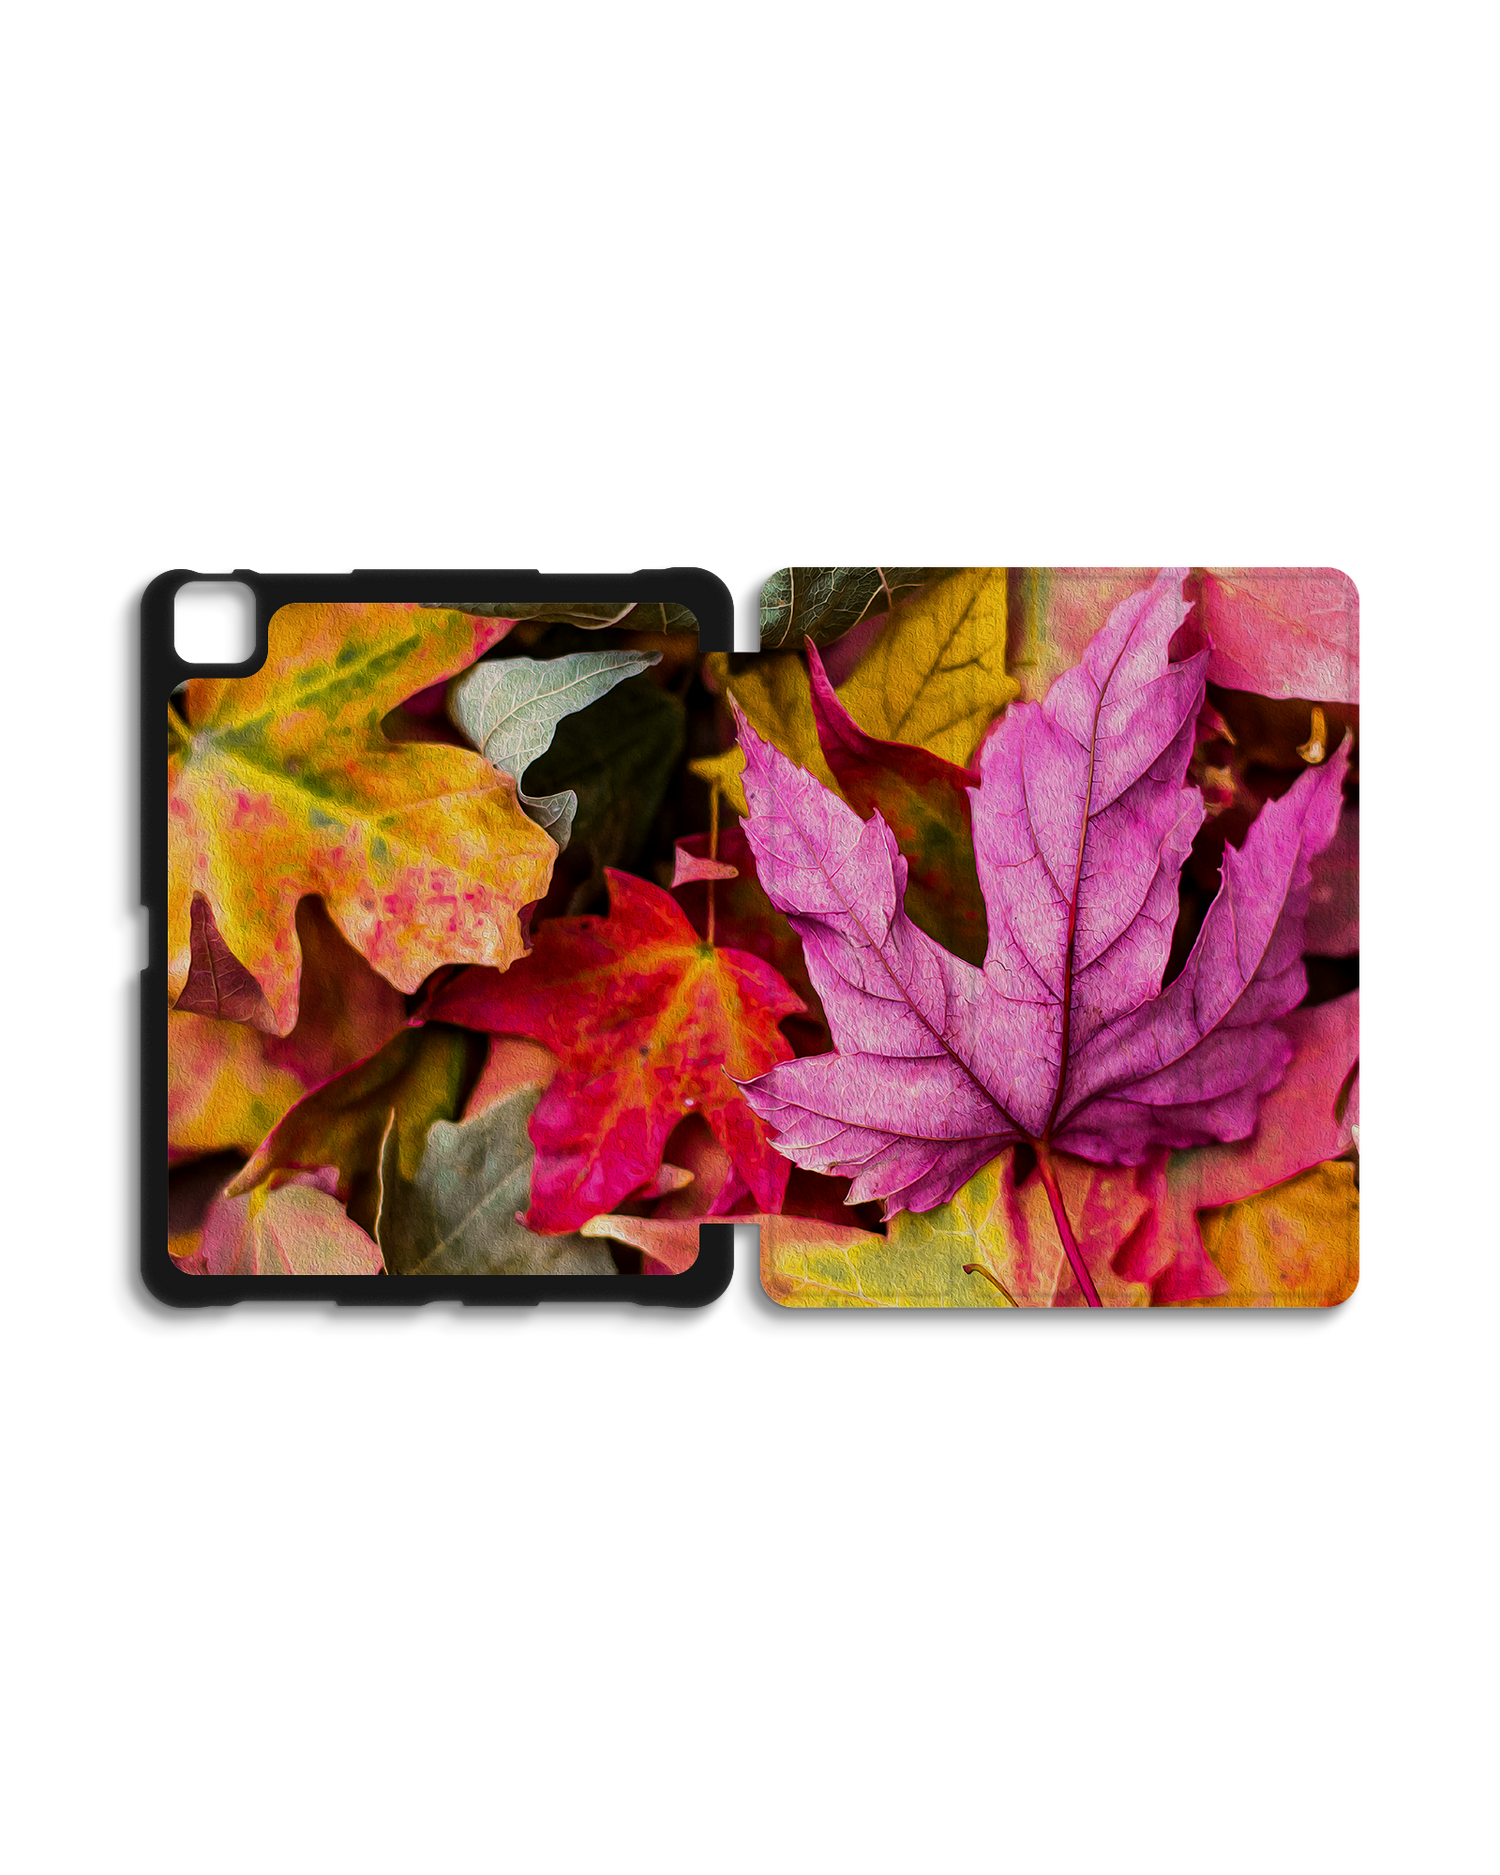 Autumn Leaves iPad Case with Pencil Holder for Apple iPad Pro 6 12.9